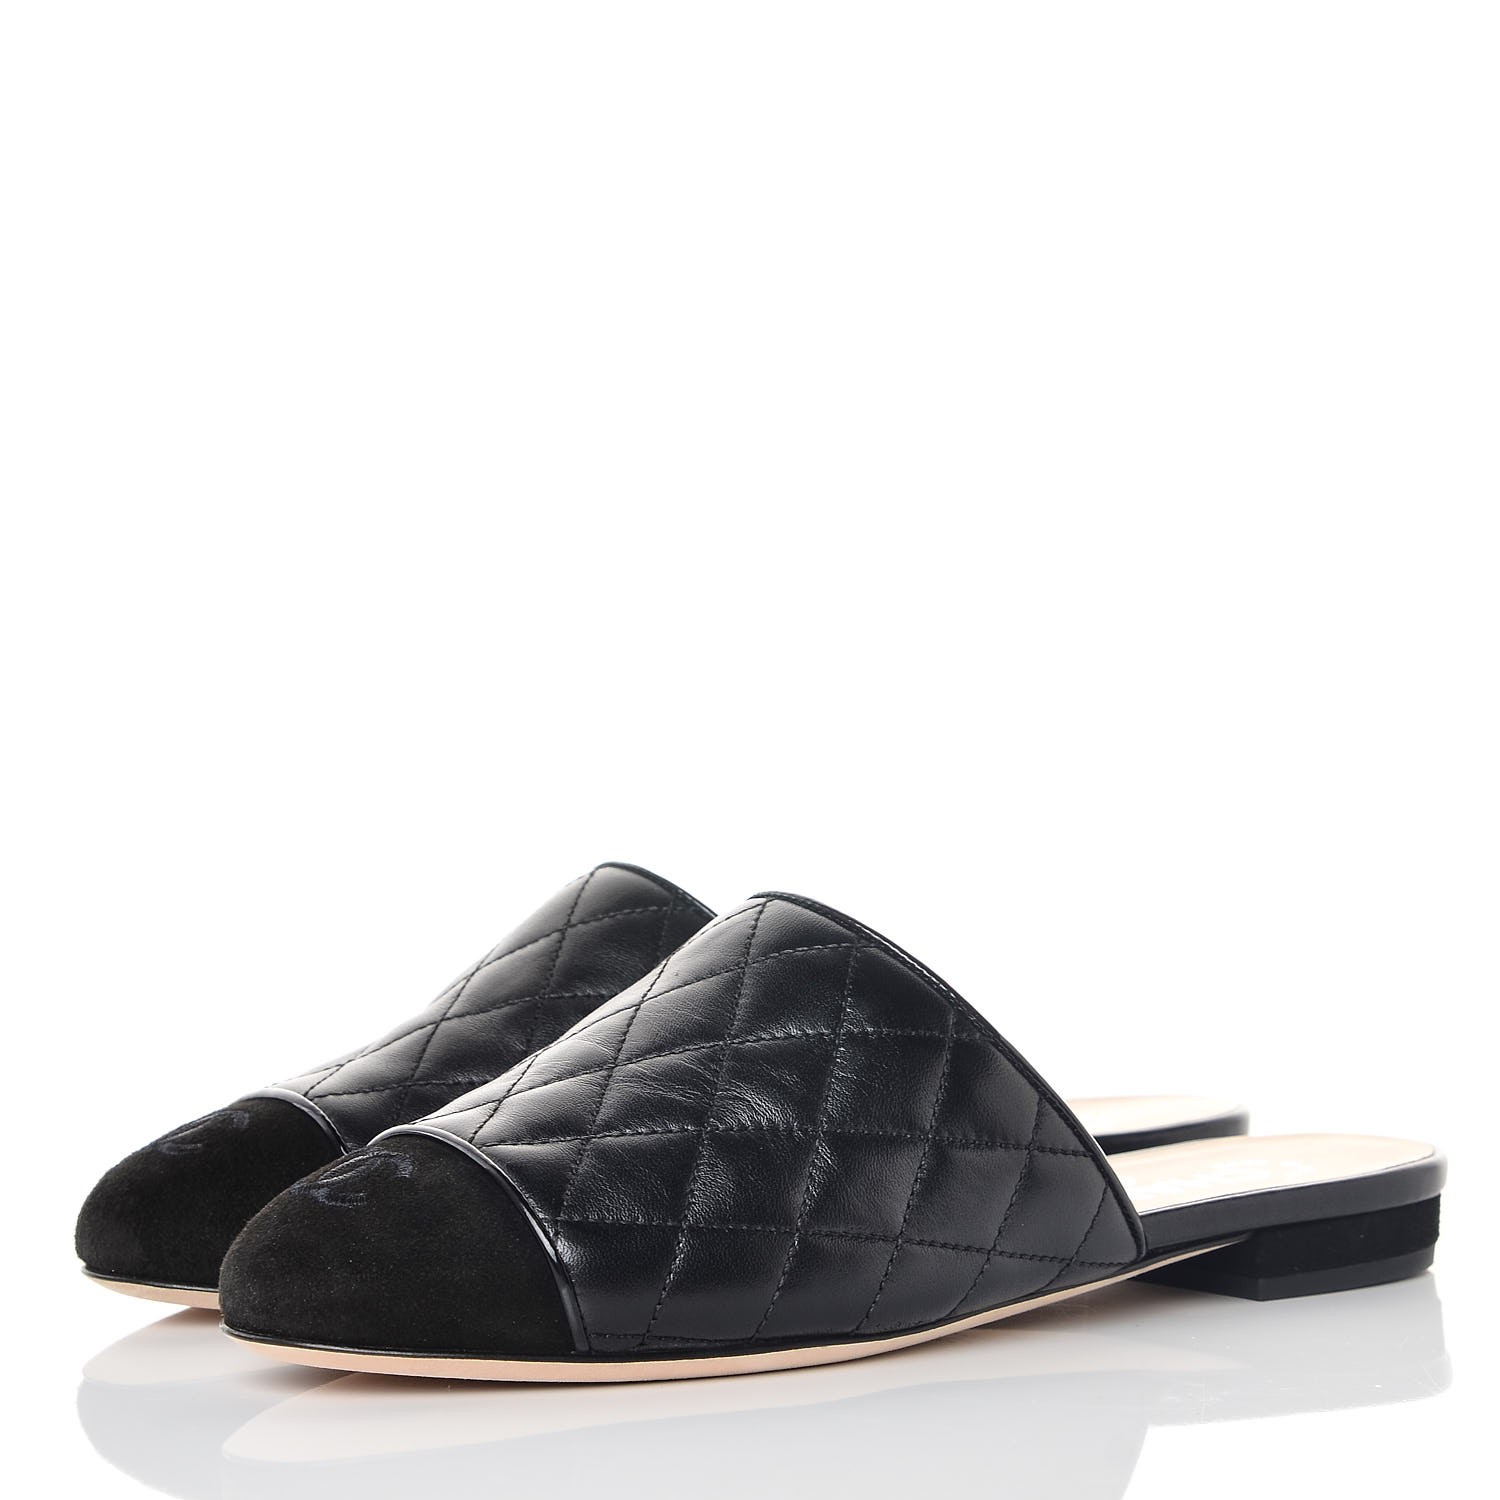 CHANEL Lambskin Kid Suede Quilted Mules 36 Black 343663